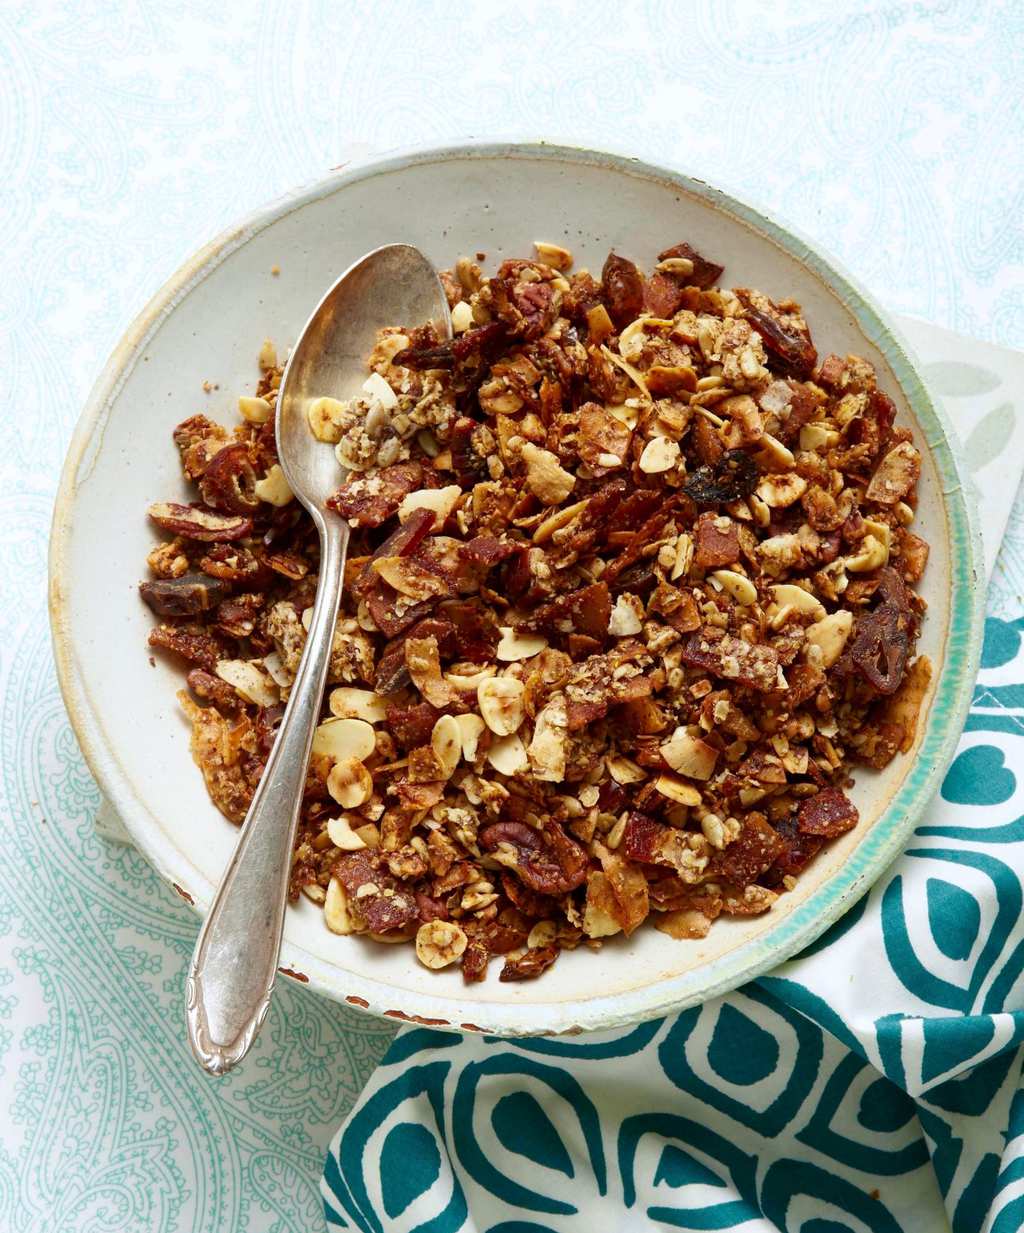 Granola in a bowl with a metal spoon.